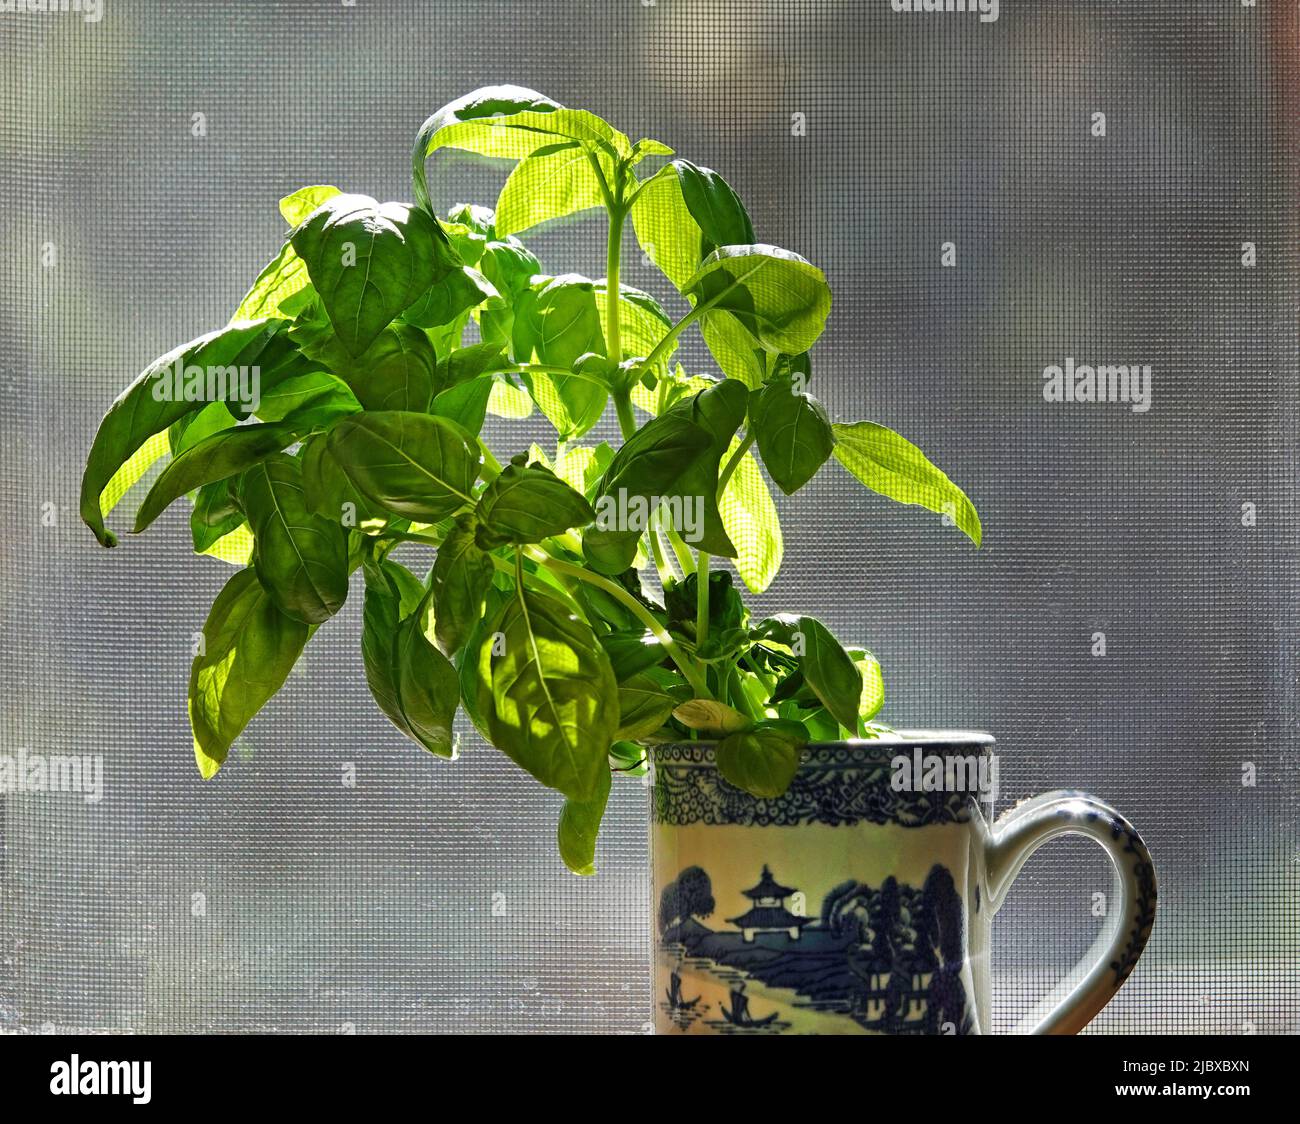 Sprigs of fresh basil in a large tumbler on a window sill. Stock Photo